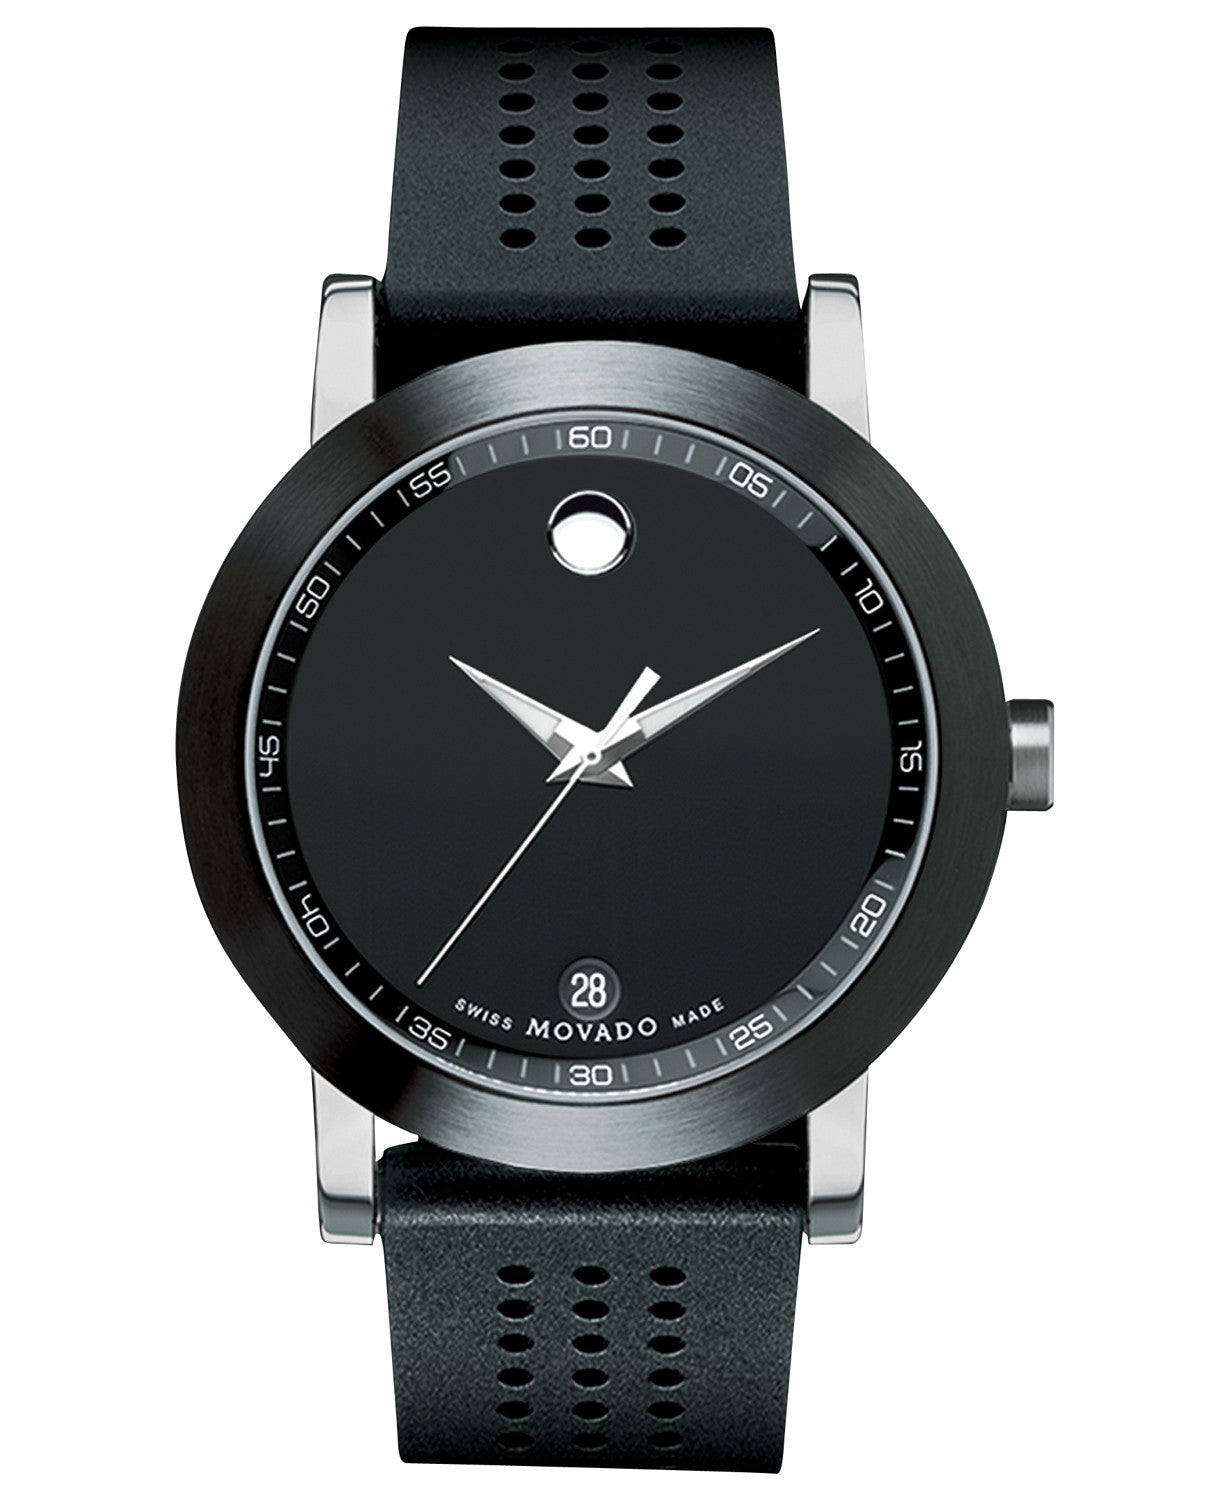 Movado Men's Museum Sport Black Perforated Rubber Strap Watch – D